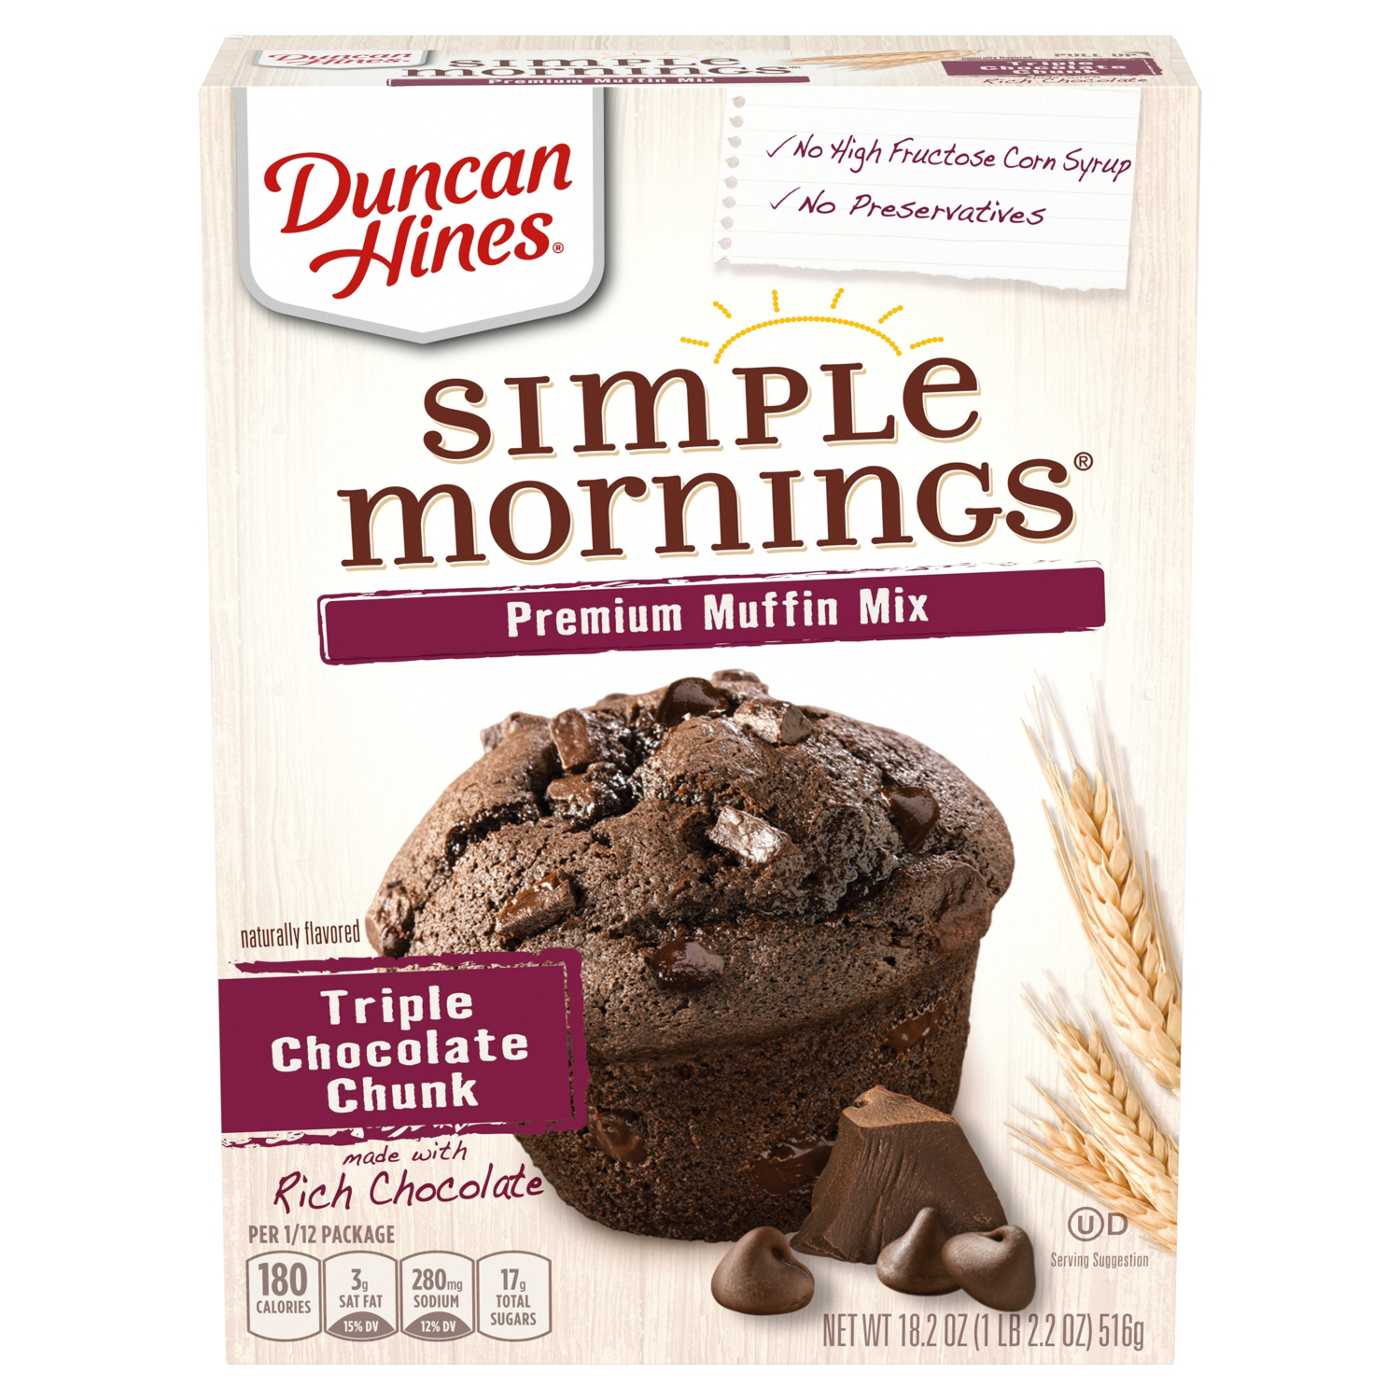 Duncan Hines Simple Mornings Triple Chocolate Chunk Premium Muffin Mix; image 1 of 7